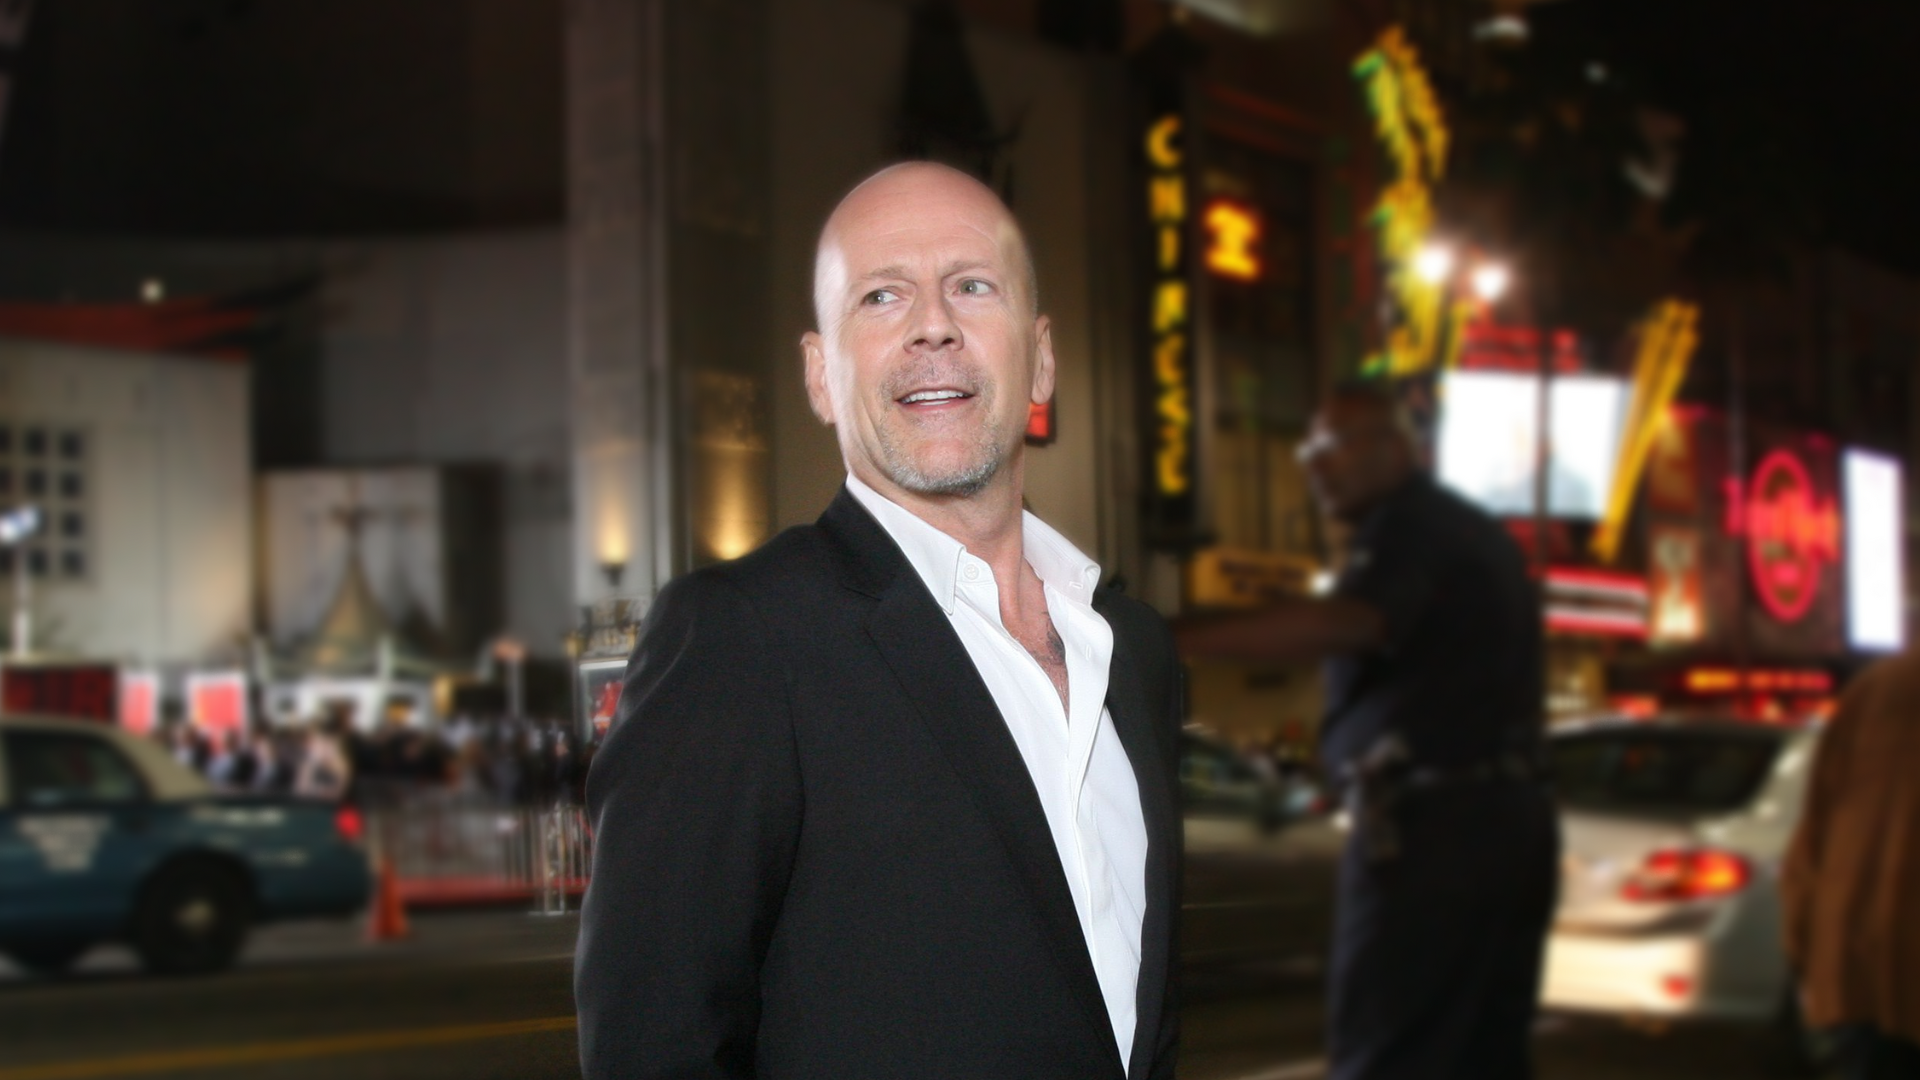 A photo of Bruce Willis from 2010 smiling and in a tuxedo on Hollywood Boulevard, across the street from Grauman's Chinese Theatre.